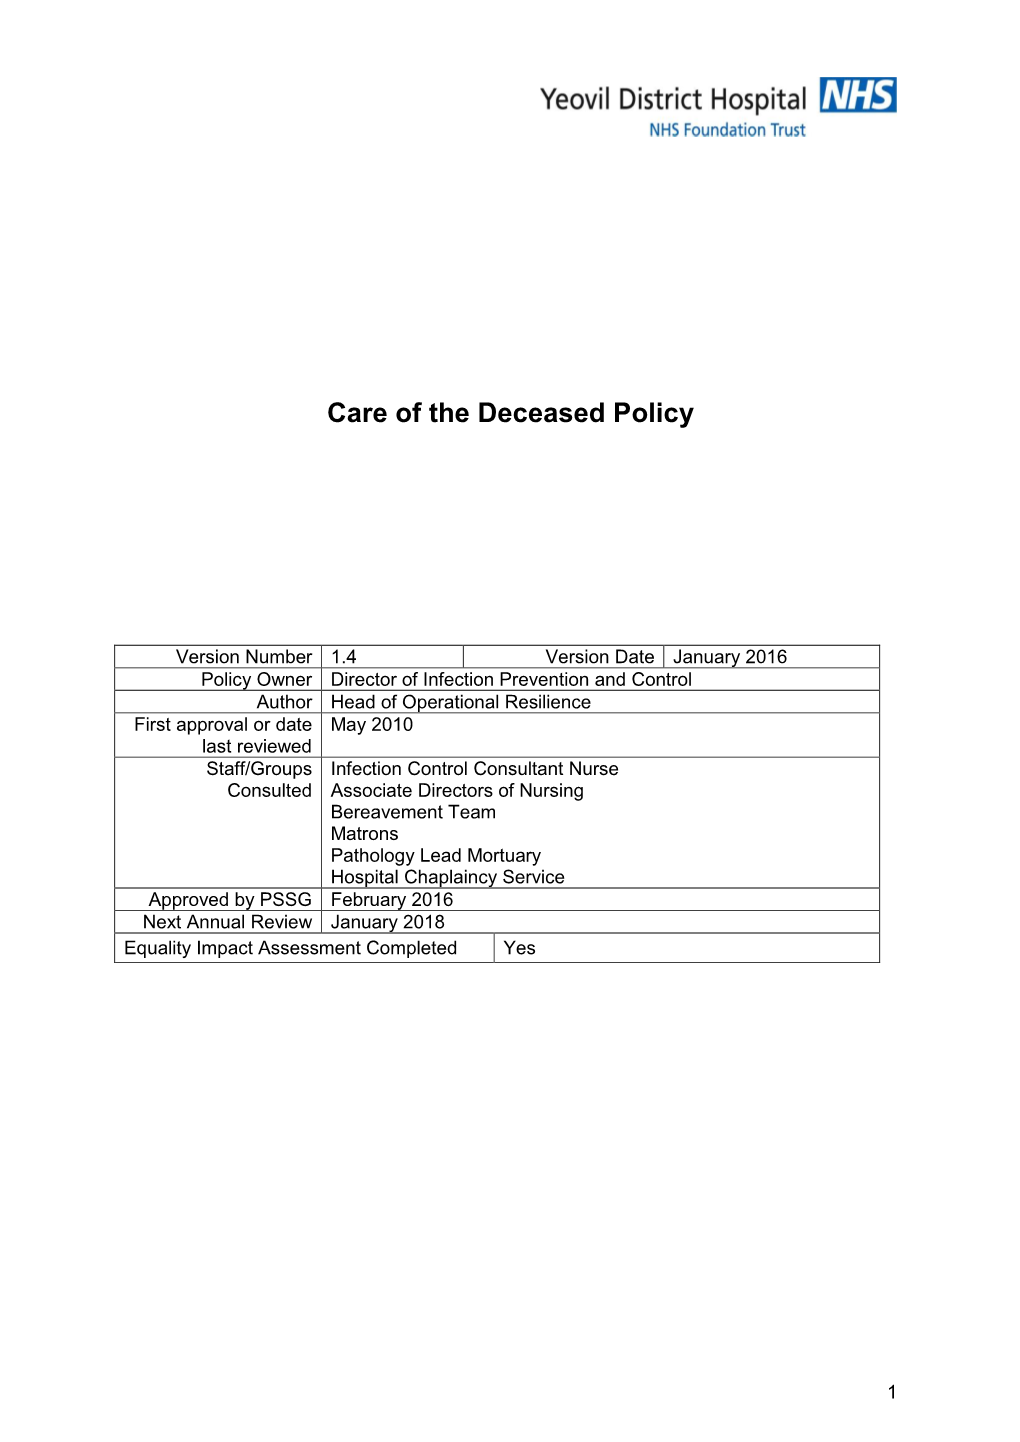 Care of the Deceased Policy